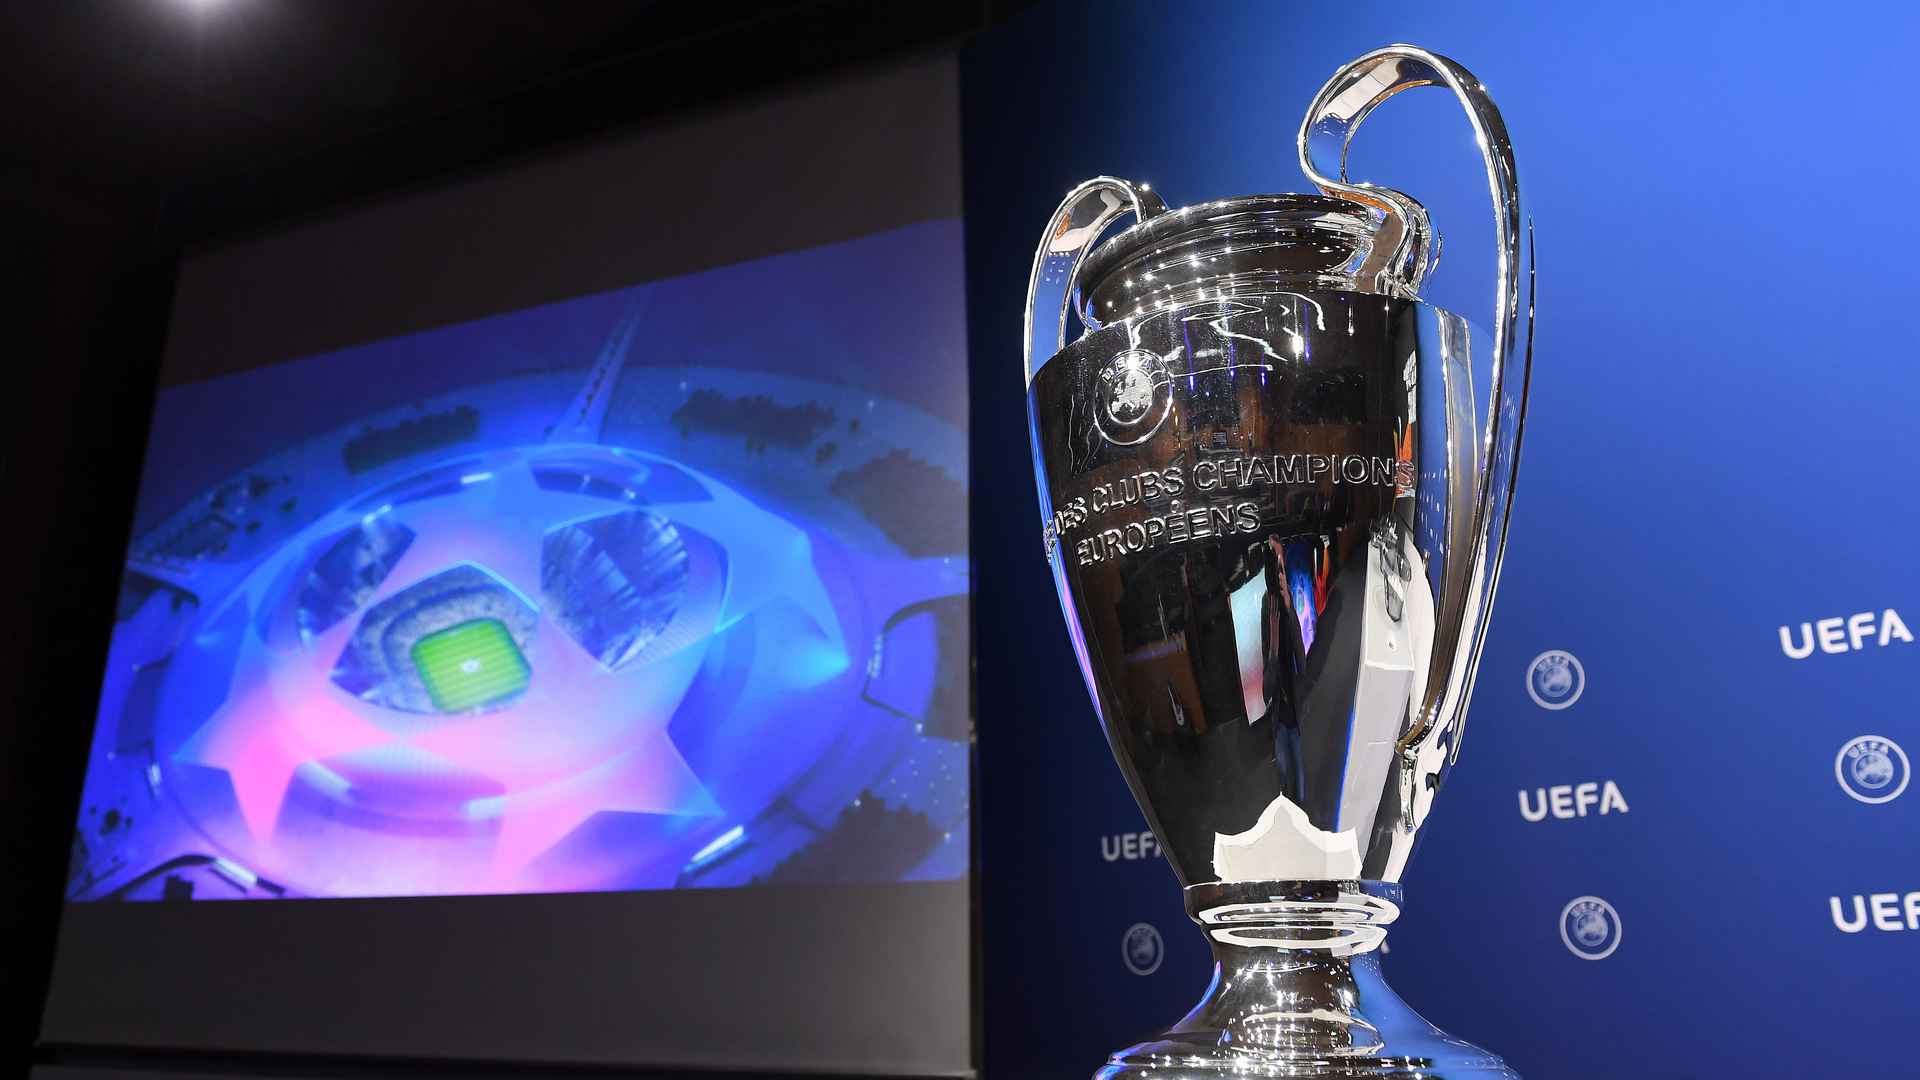 Ukraine-Russia Conflict: BREAKING NEWS as UEFA call an emergency meeting for Friday morning to move Champions League Final from St Petersburg amid Russia's invasion of Ukraine